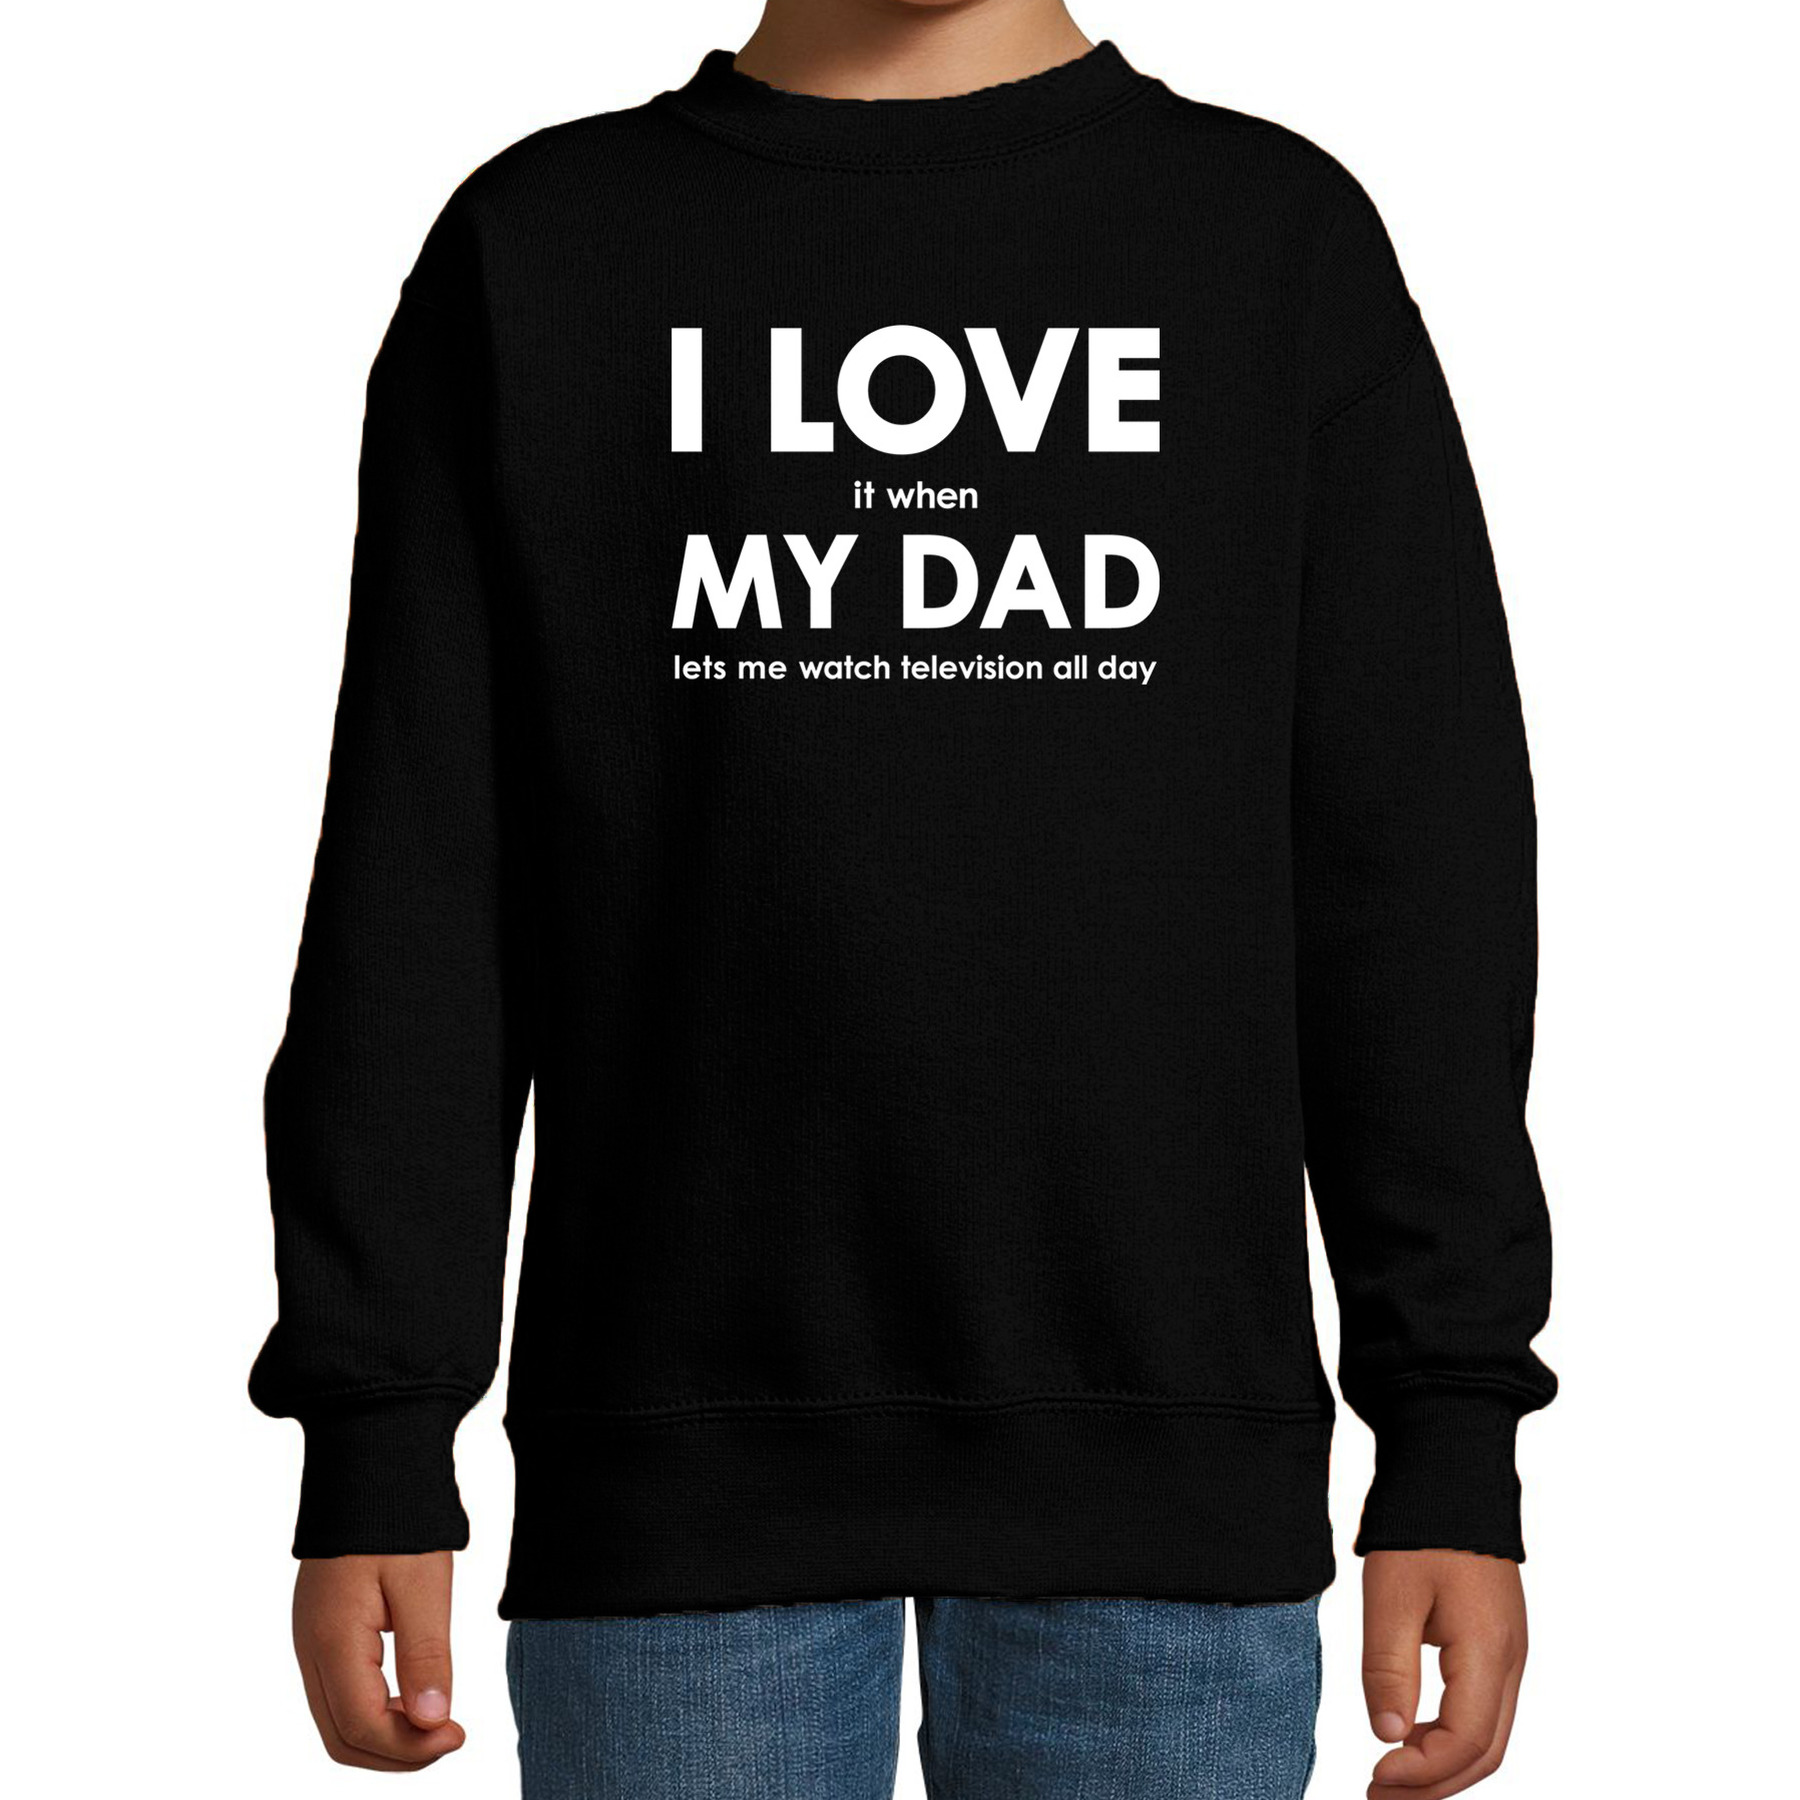 I love it when my dad lets me watch television all day sweater zwart voor kids